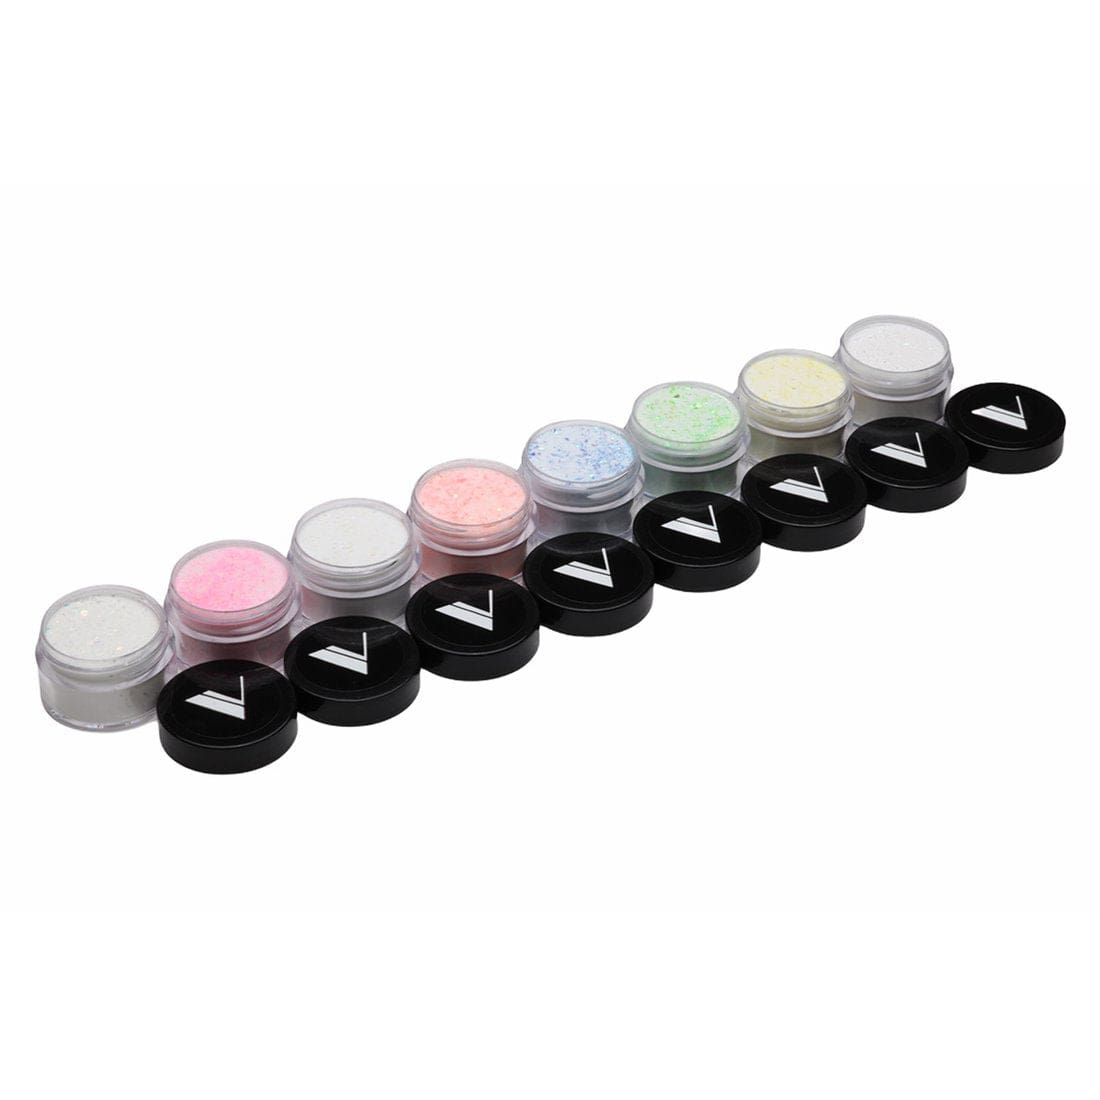 V Beauty Pure Acrylic Powder Collection Radial Lights